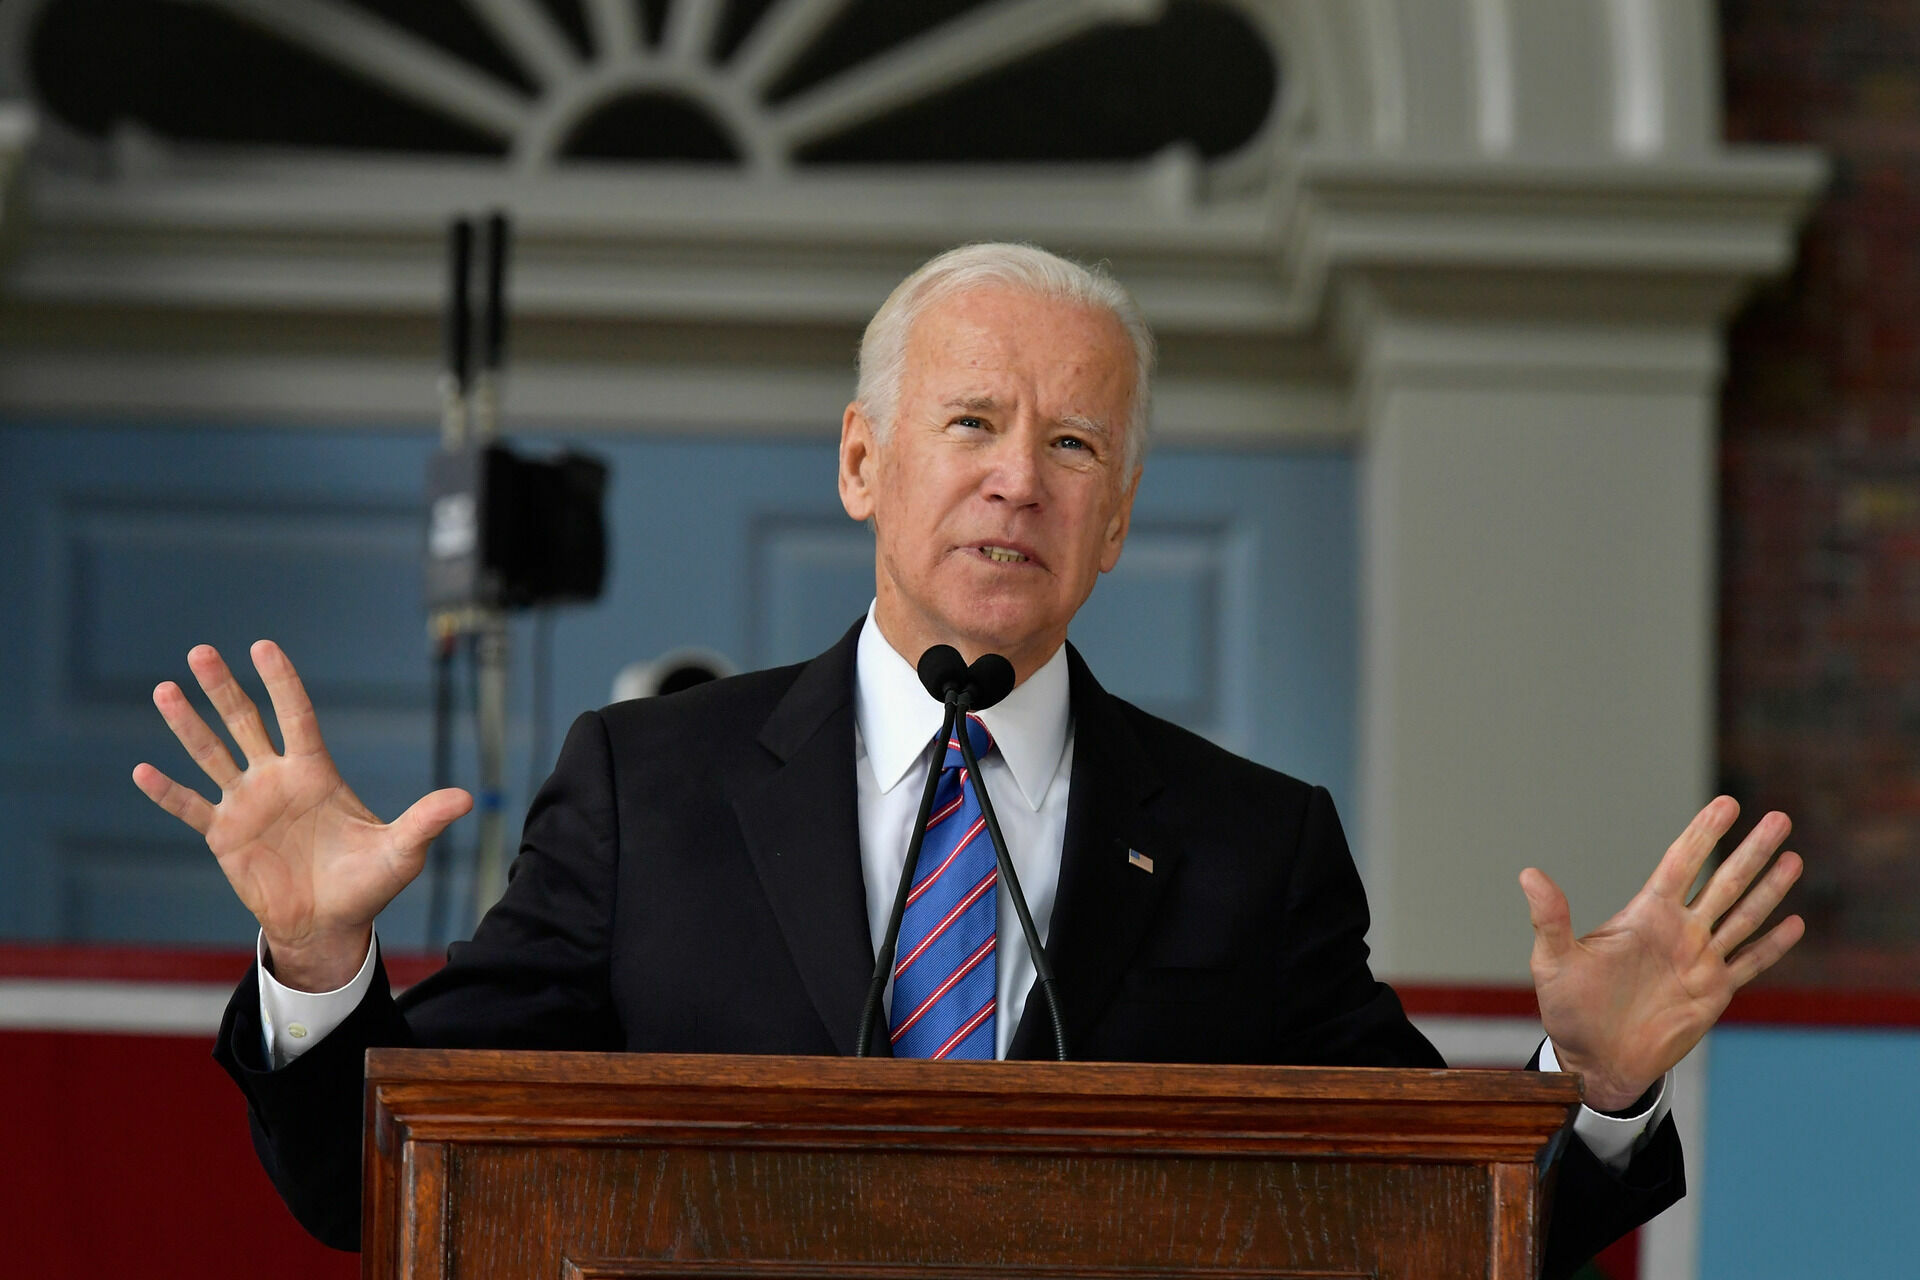 Joe Biden pledged to return the United States to WHO and not apply sanctions against China